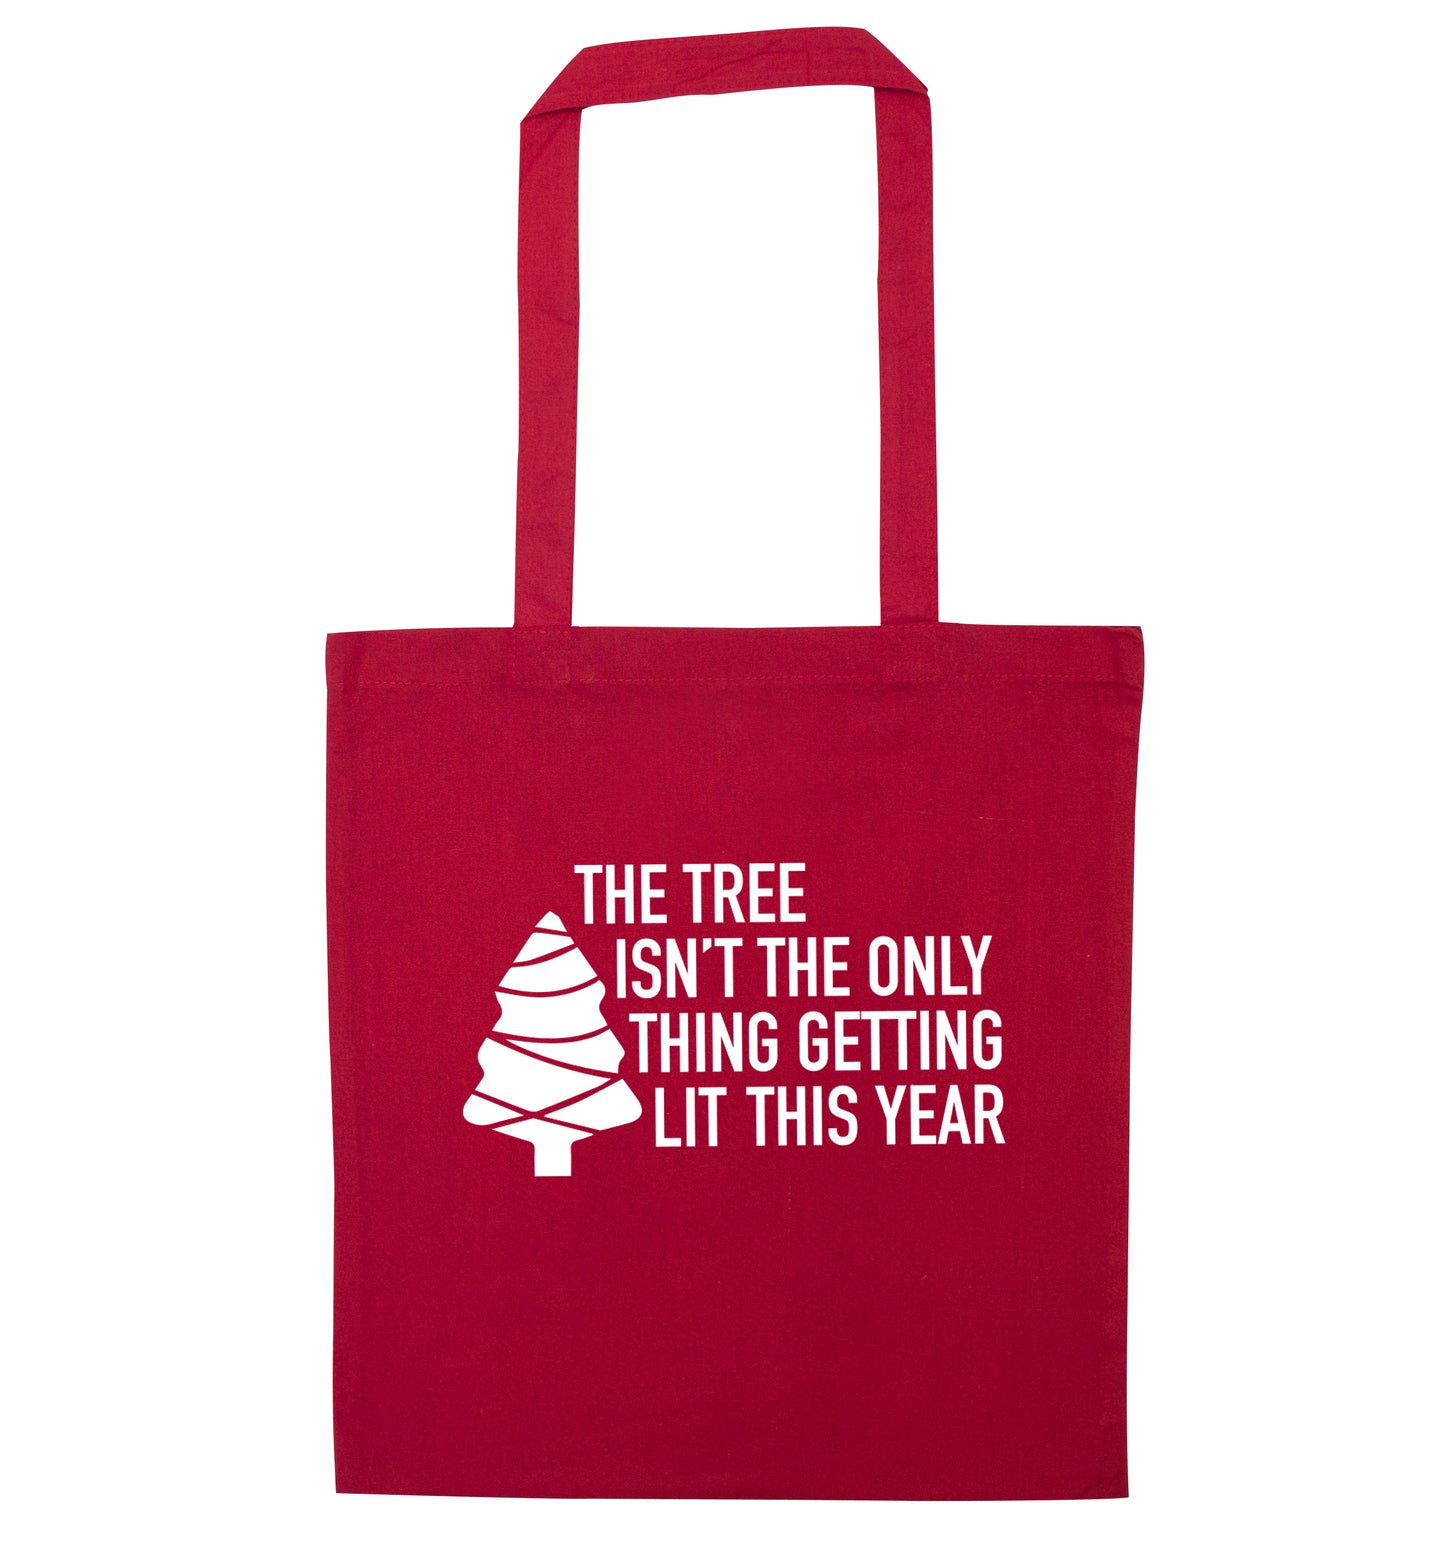 The tree isn't the only thing getting lit this year red tote bag